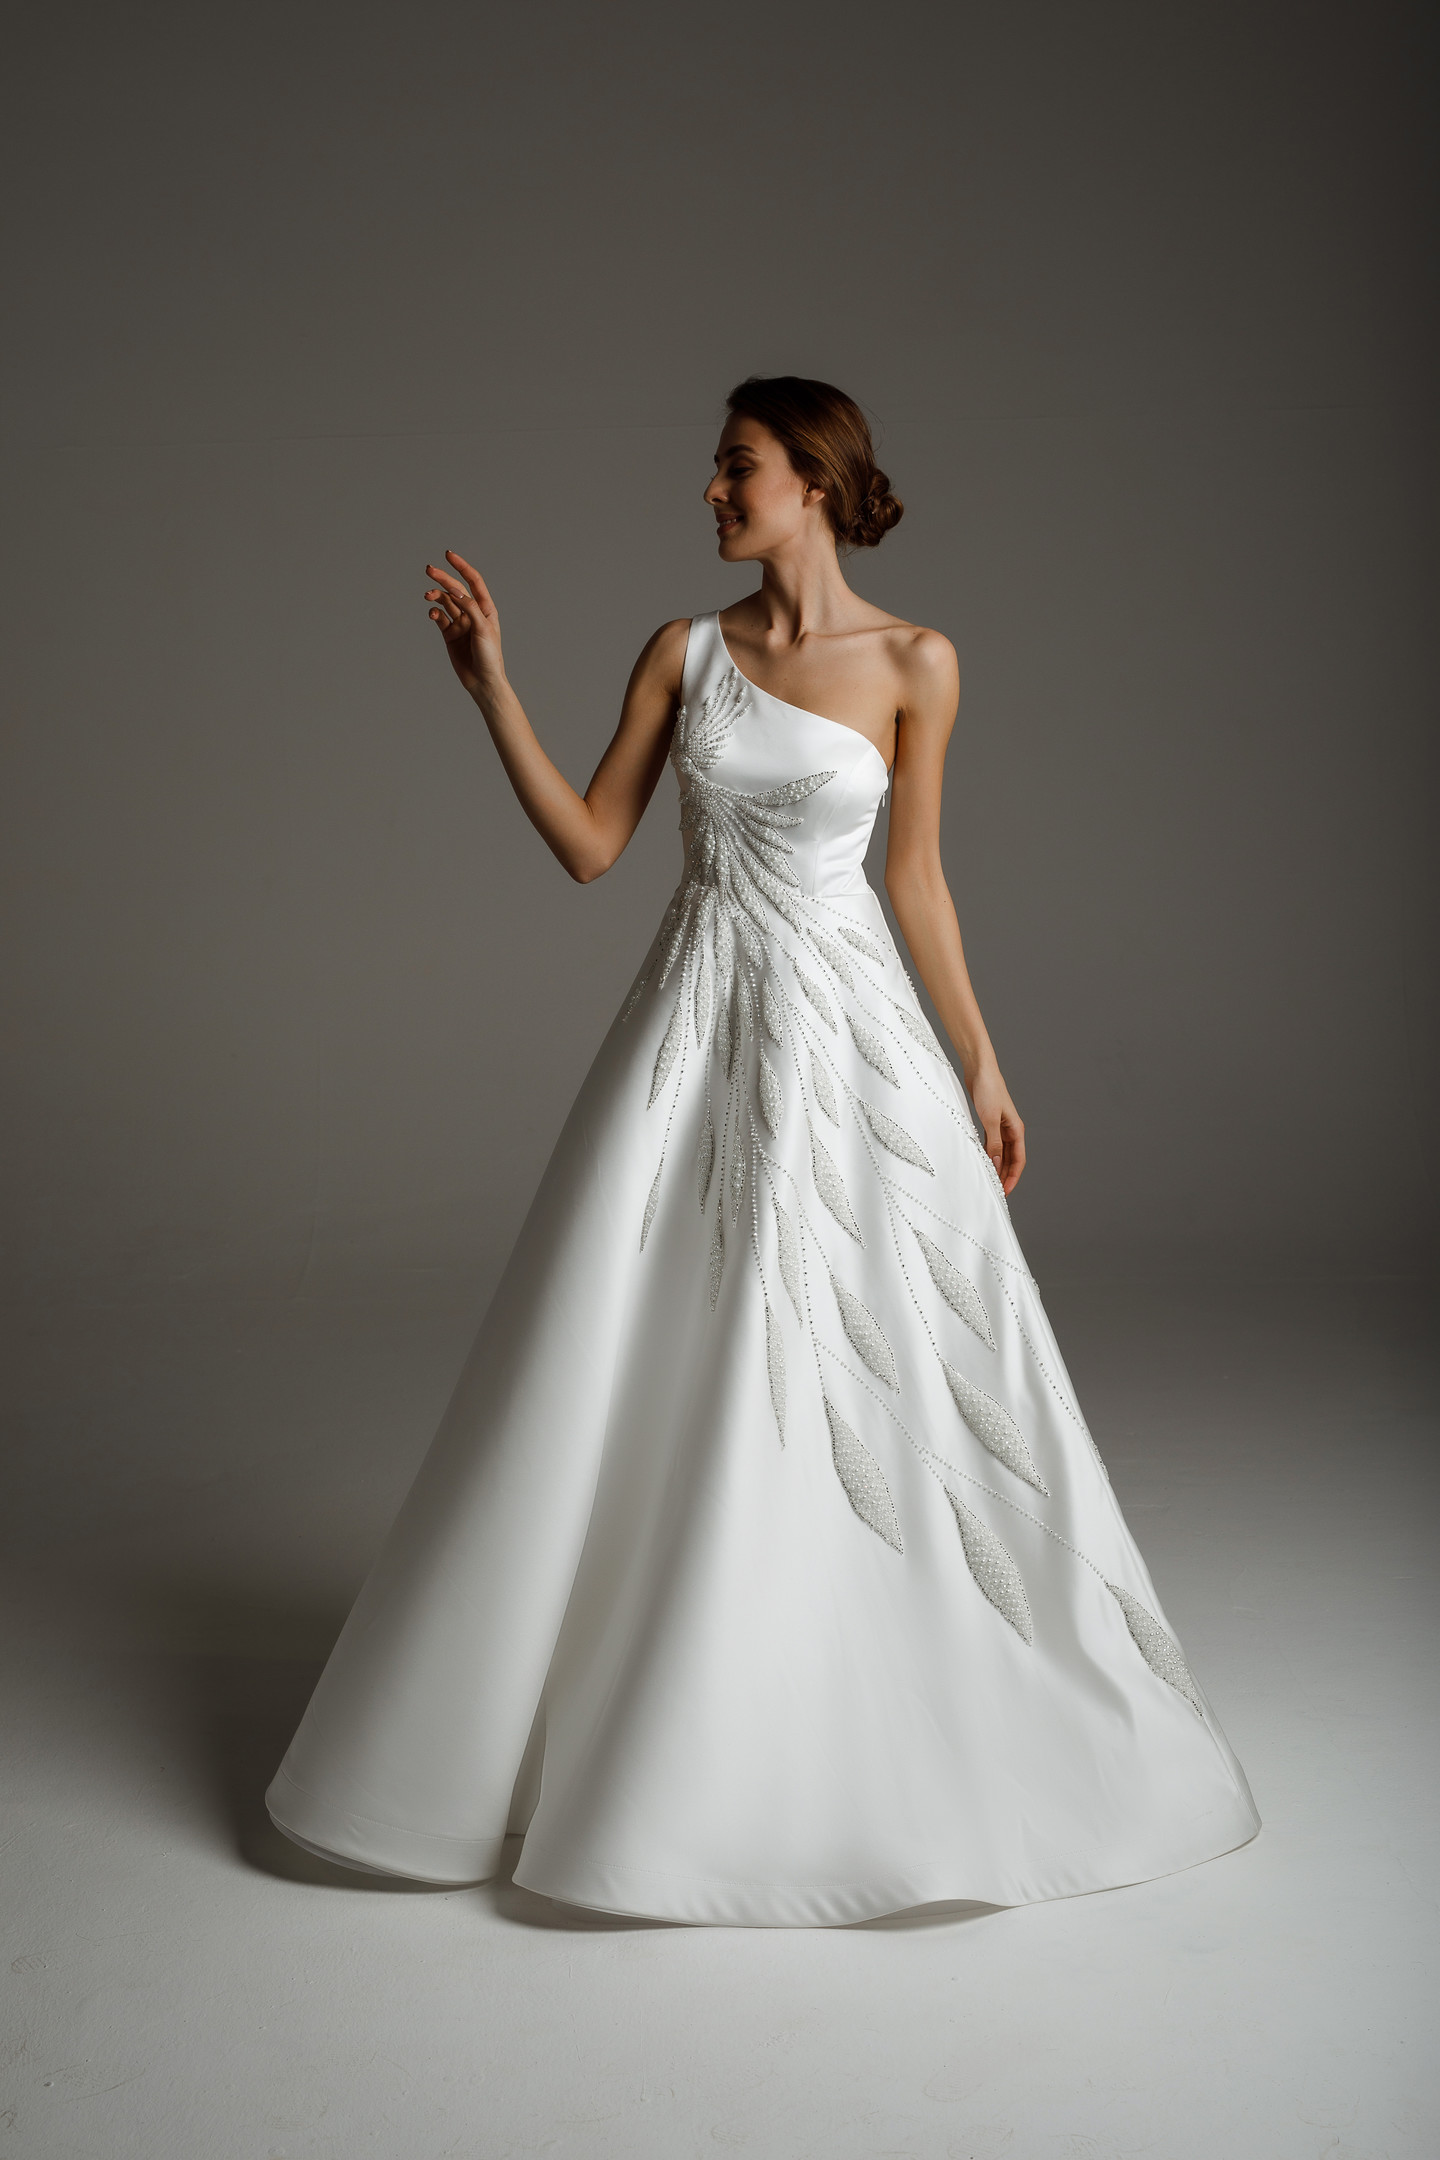 Blanche gown, 2020, couture, dress, bridal, off-white, satin, embroidery, A-line, popular, archive